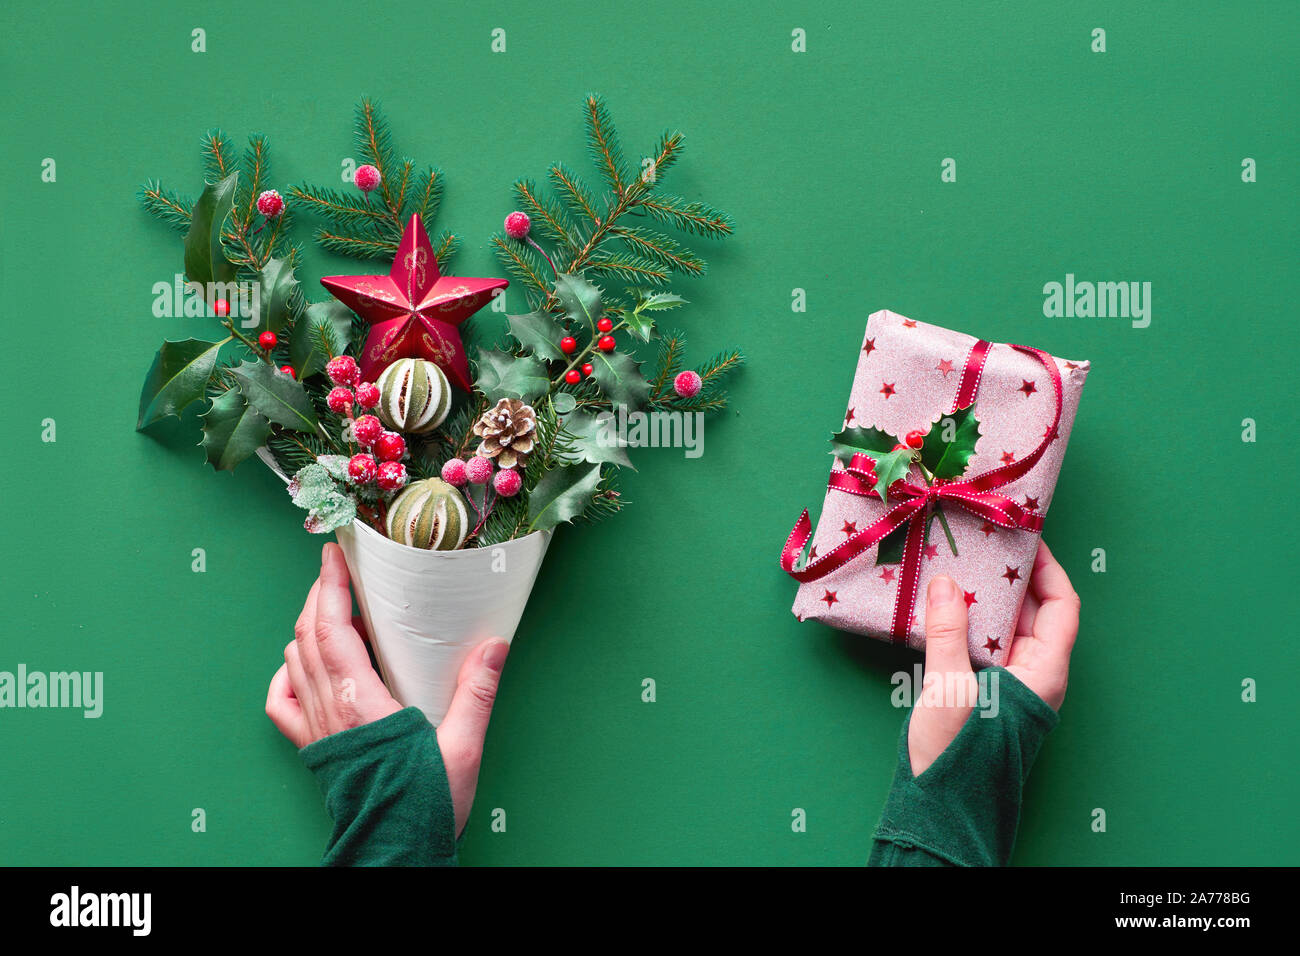 Christmas background flat lay on green paper. Female hand holding veneer cone with fir and holly twigs decorated with candy canes and berries. Another Stock Photo